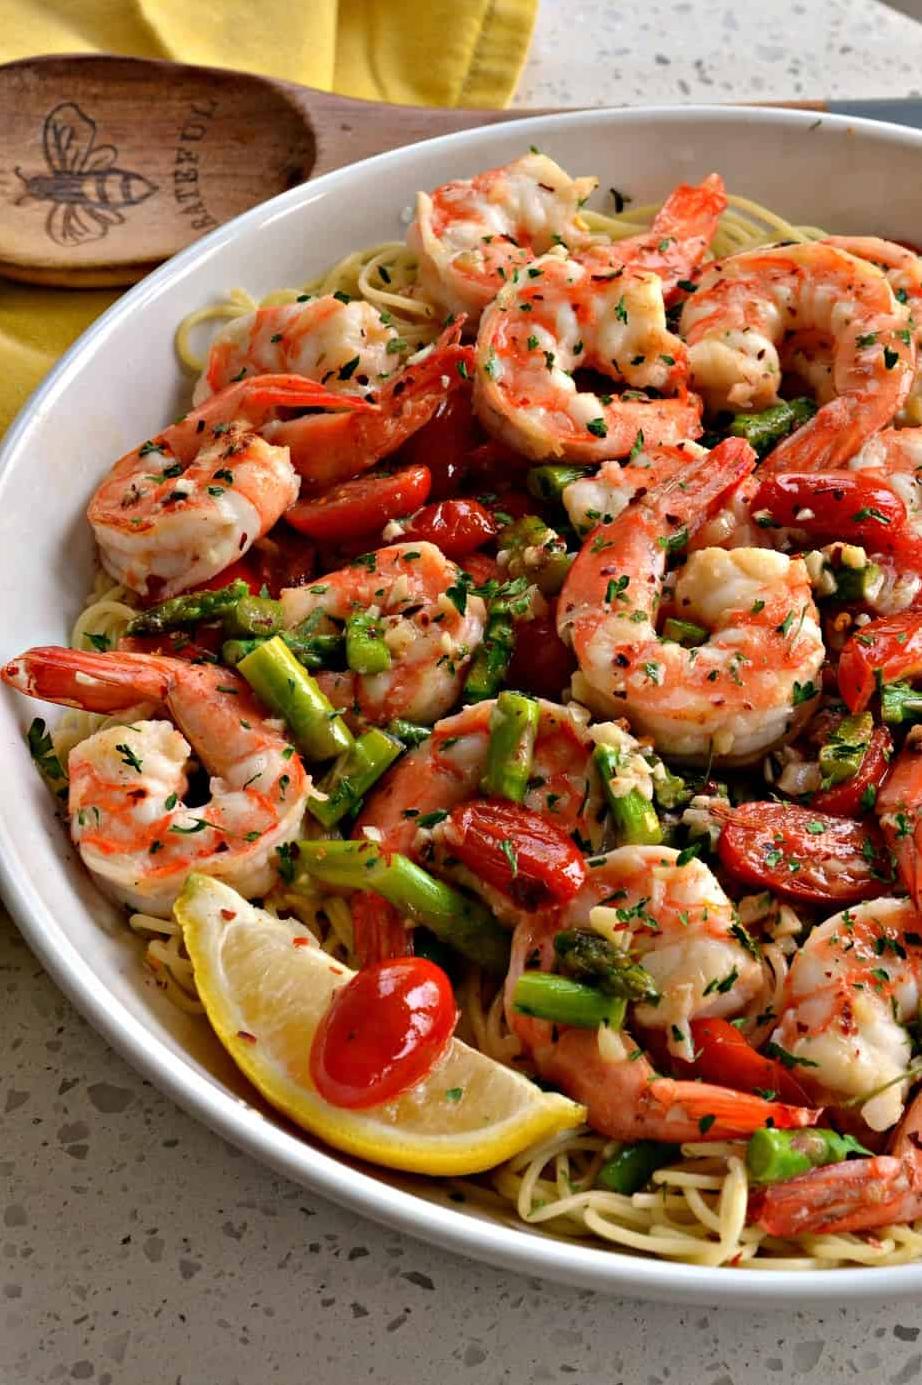 Delight Your Taste Buds with Shrimp and Wine Recipe